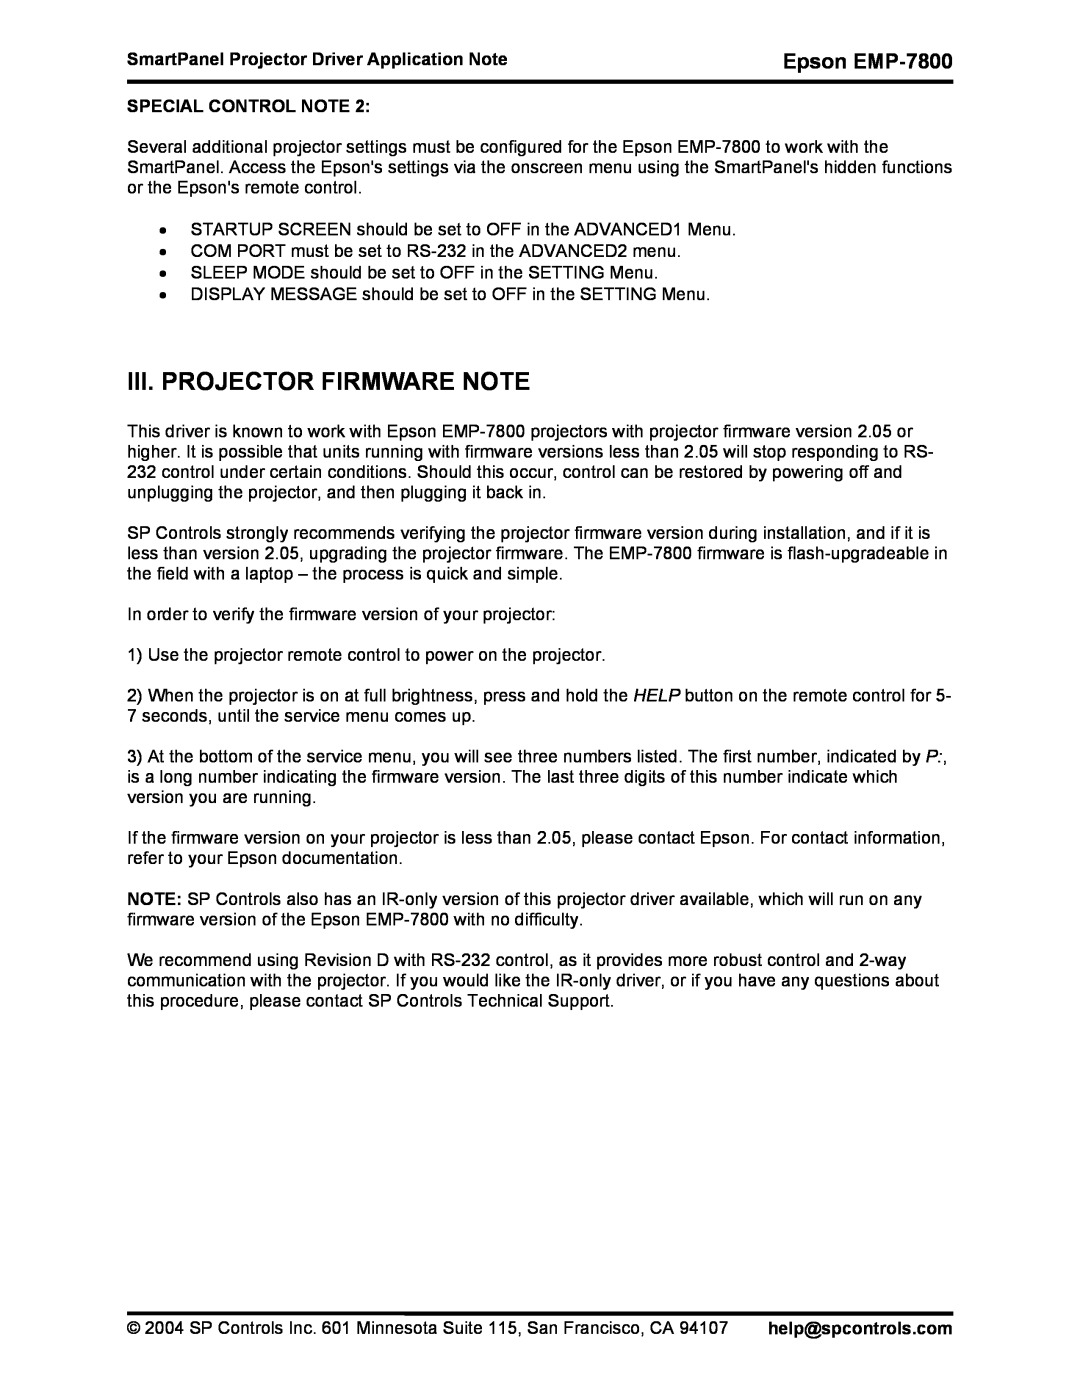 Epson DR-EPS19 quick start Iii.Projector Firmware Note, Epson EMP-7800, SmartPanel Projector Driver Application Note 